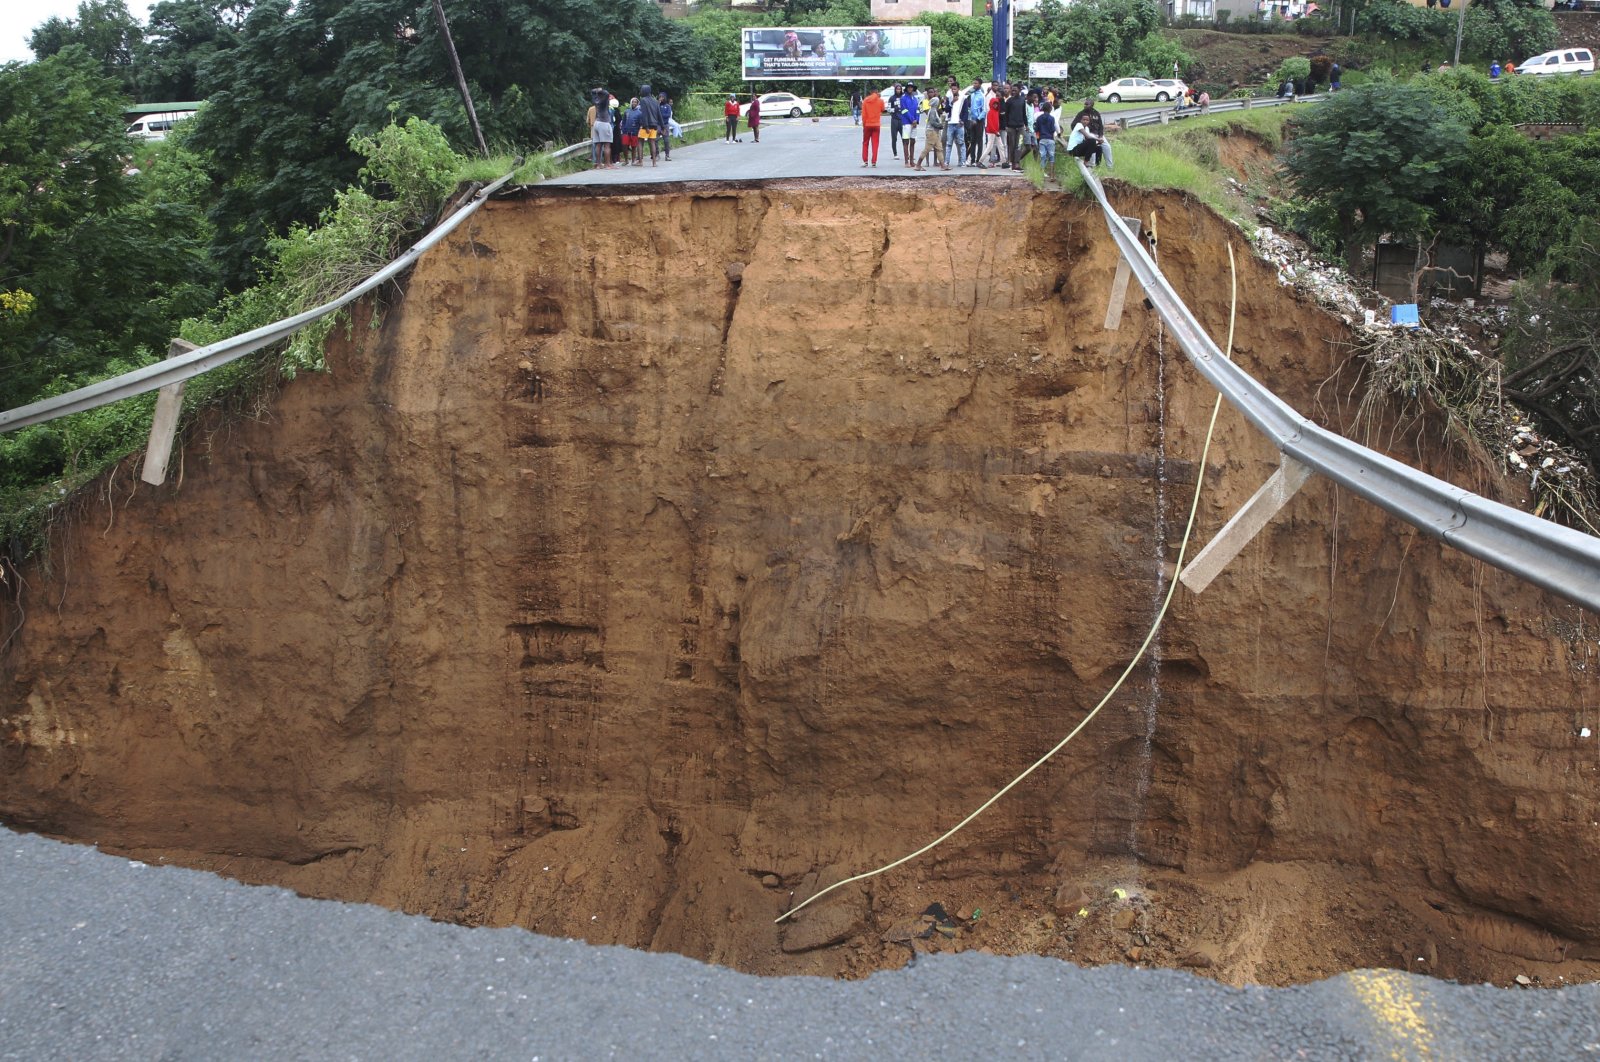 Stranded people stand in front of a bridge that was swept away in Ntuzuma, outside Durban, South Africa, April 12, 2022. (AP Photo)